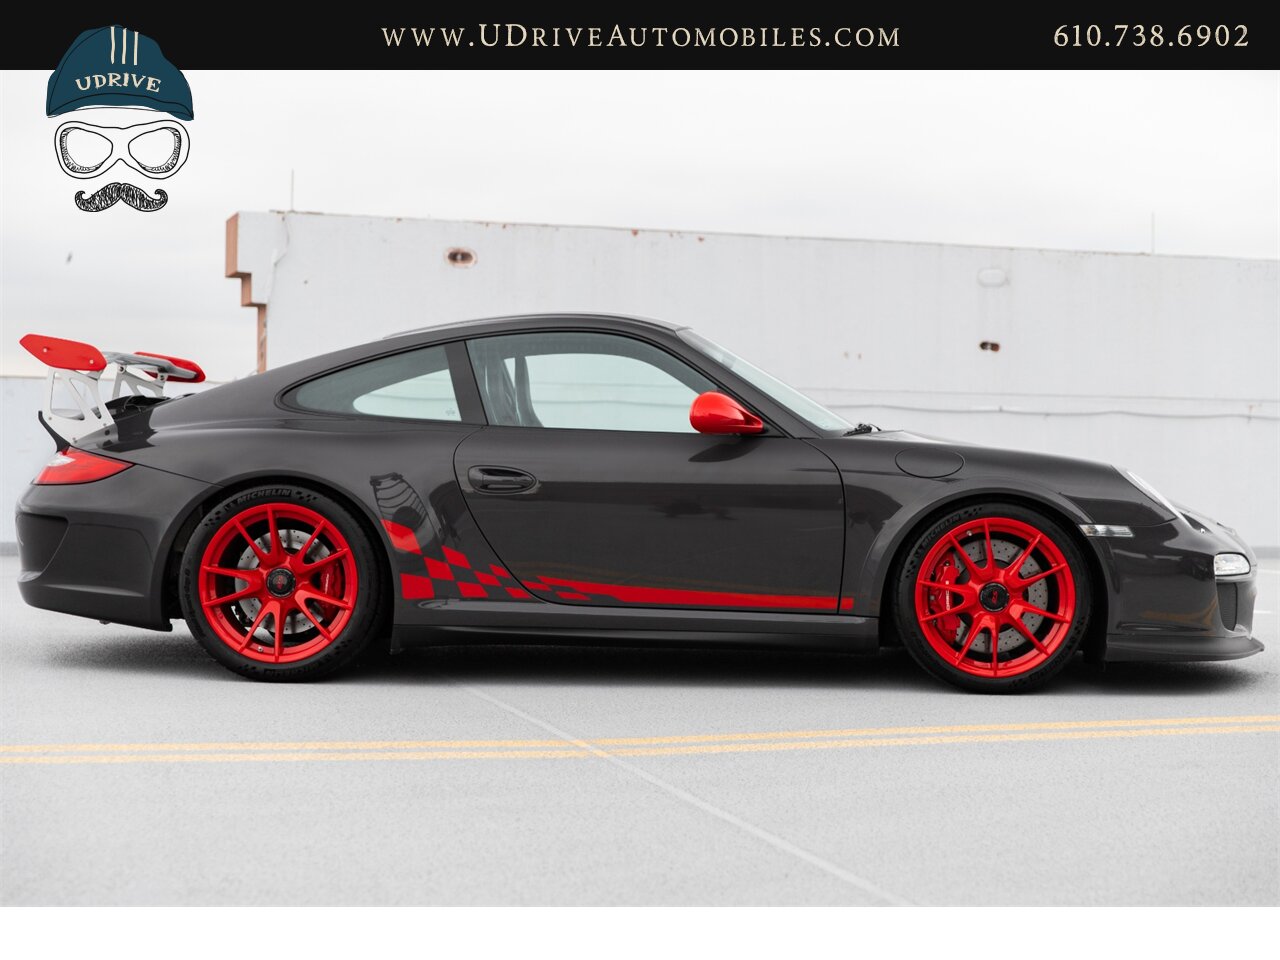 2010 Porsche 911 GT3 RS 1k Miles Dev Red Stitching Throughout  Front Axle Lift Sport Chrono 997.2 - Photo 21 - West Chester, PA 19382